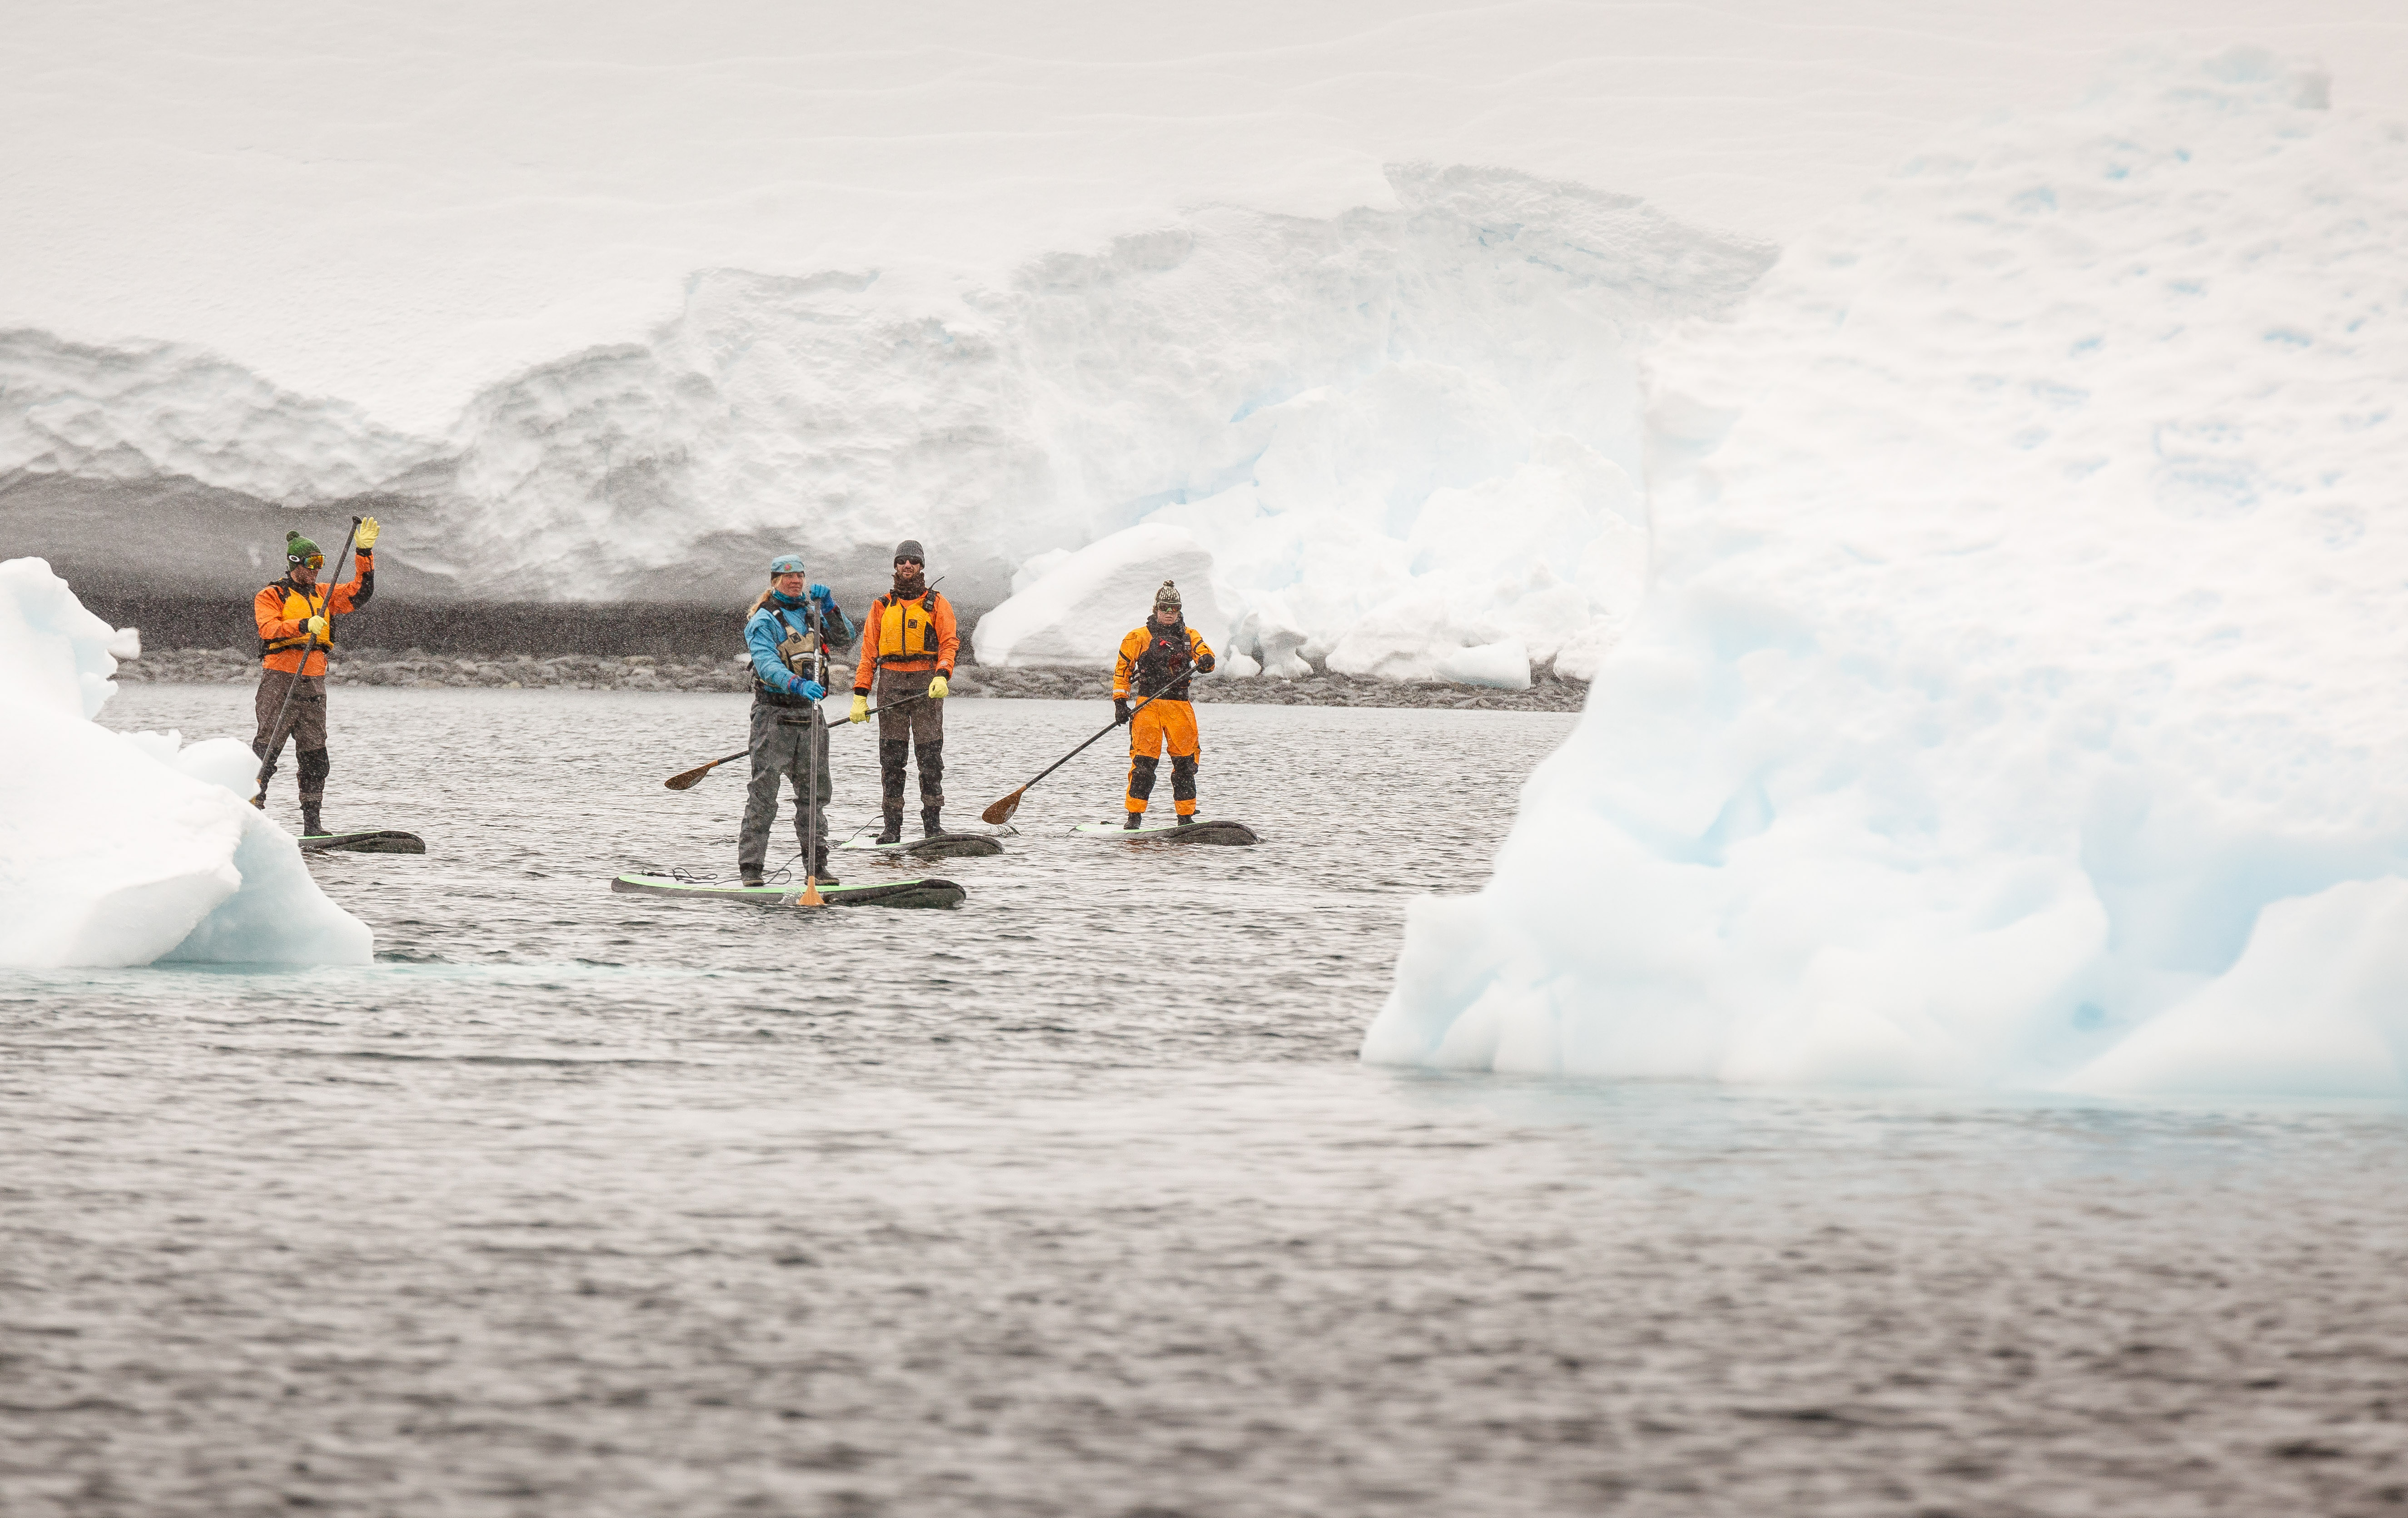 Guided stand-up paddleboarding (SUP) outings let you experience the Arctic or Antarctica from the surface of pristine polar waters.